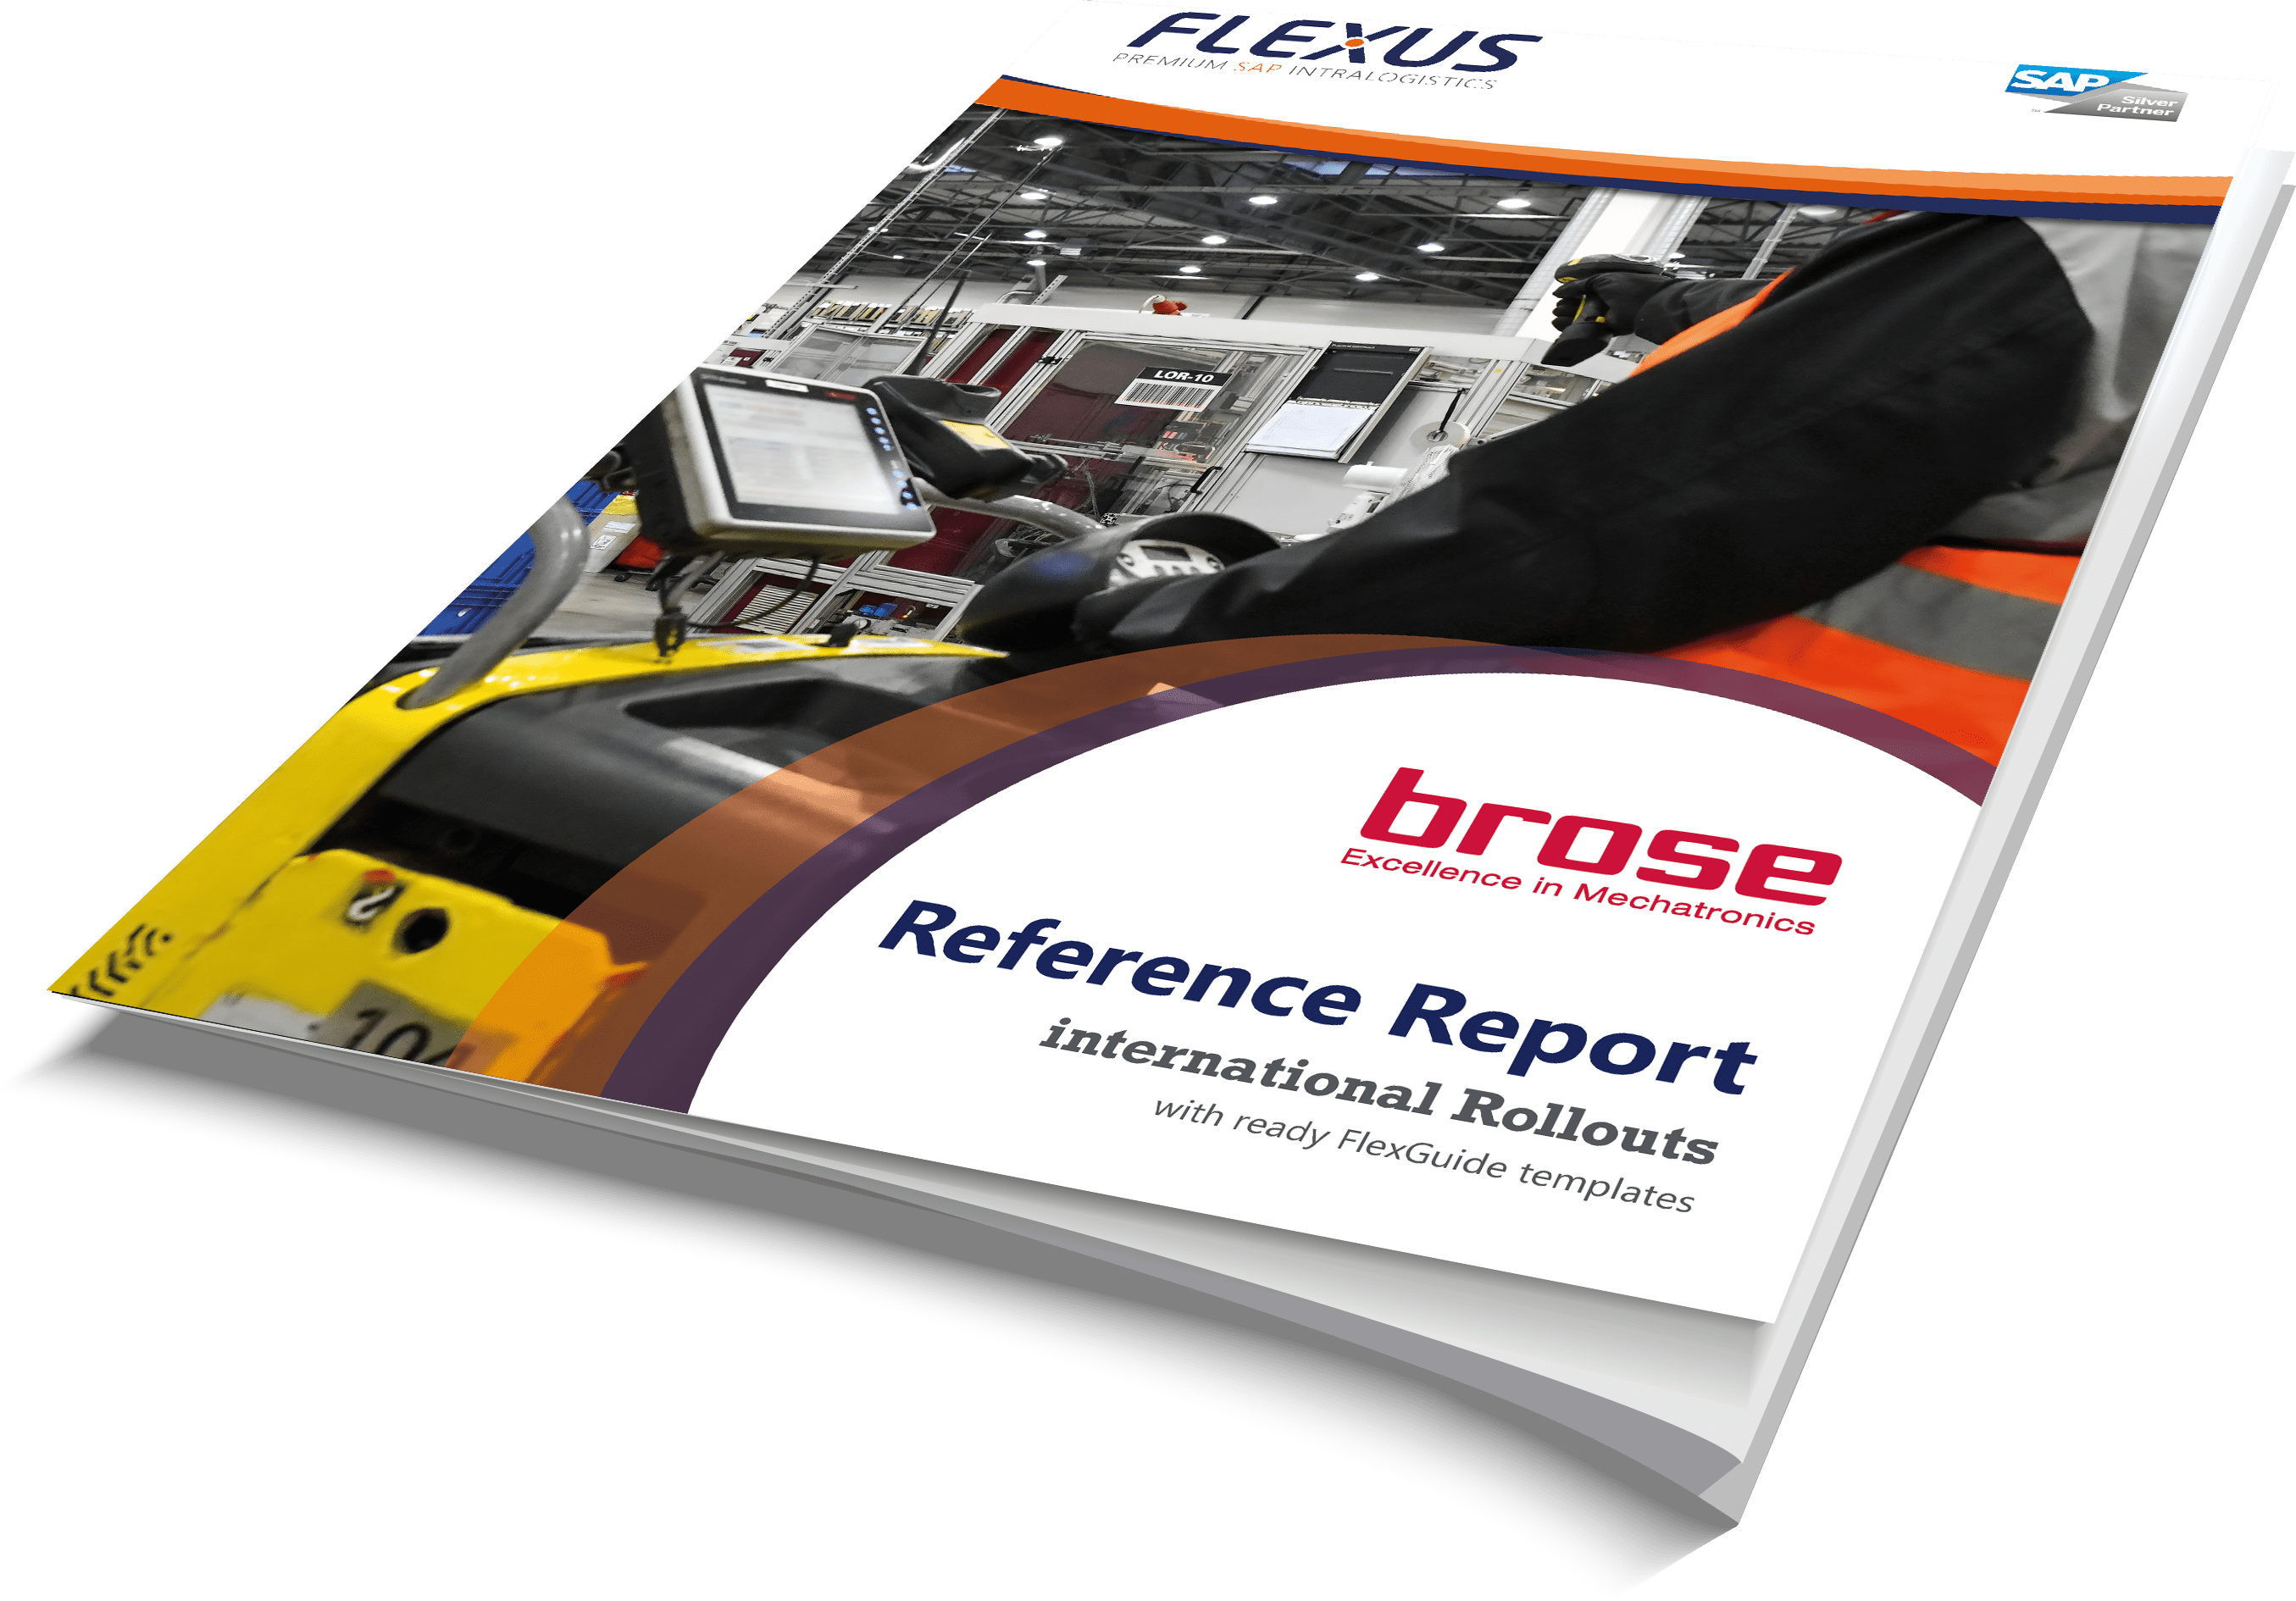 Reference report Brose